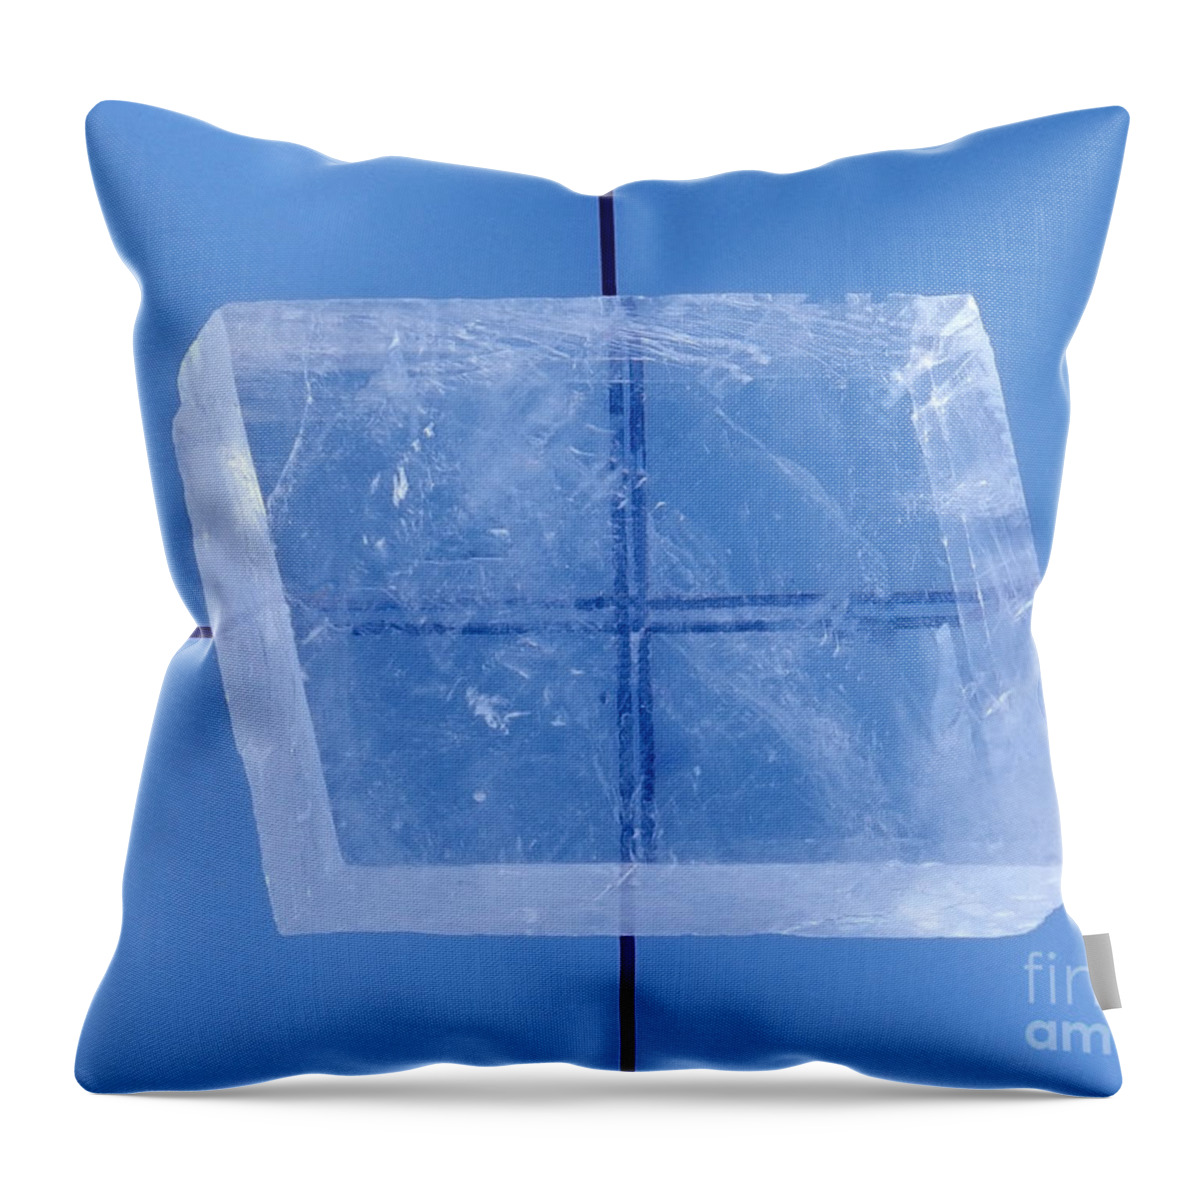 Calcite Throw Pillow featuring the photograph Calcite Birefringence by Hermann Eisenbeiss